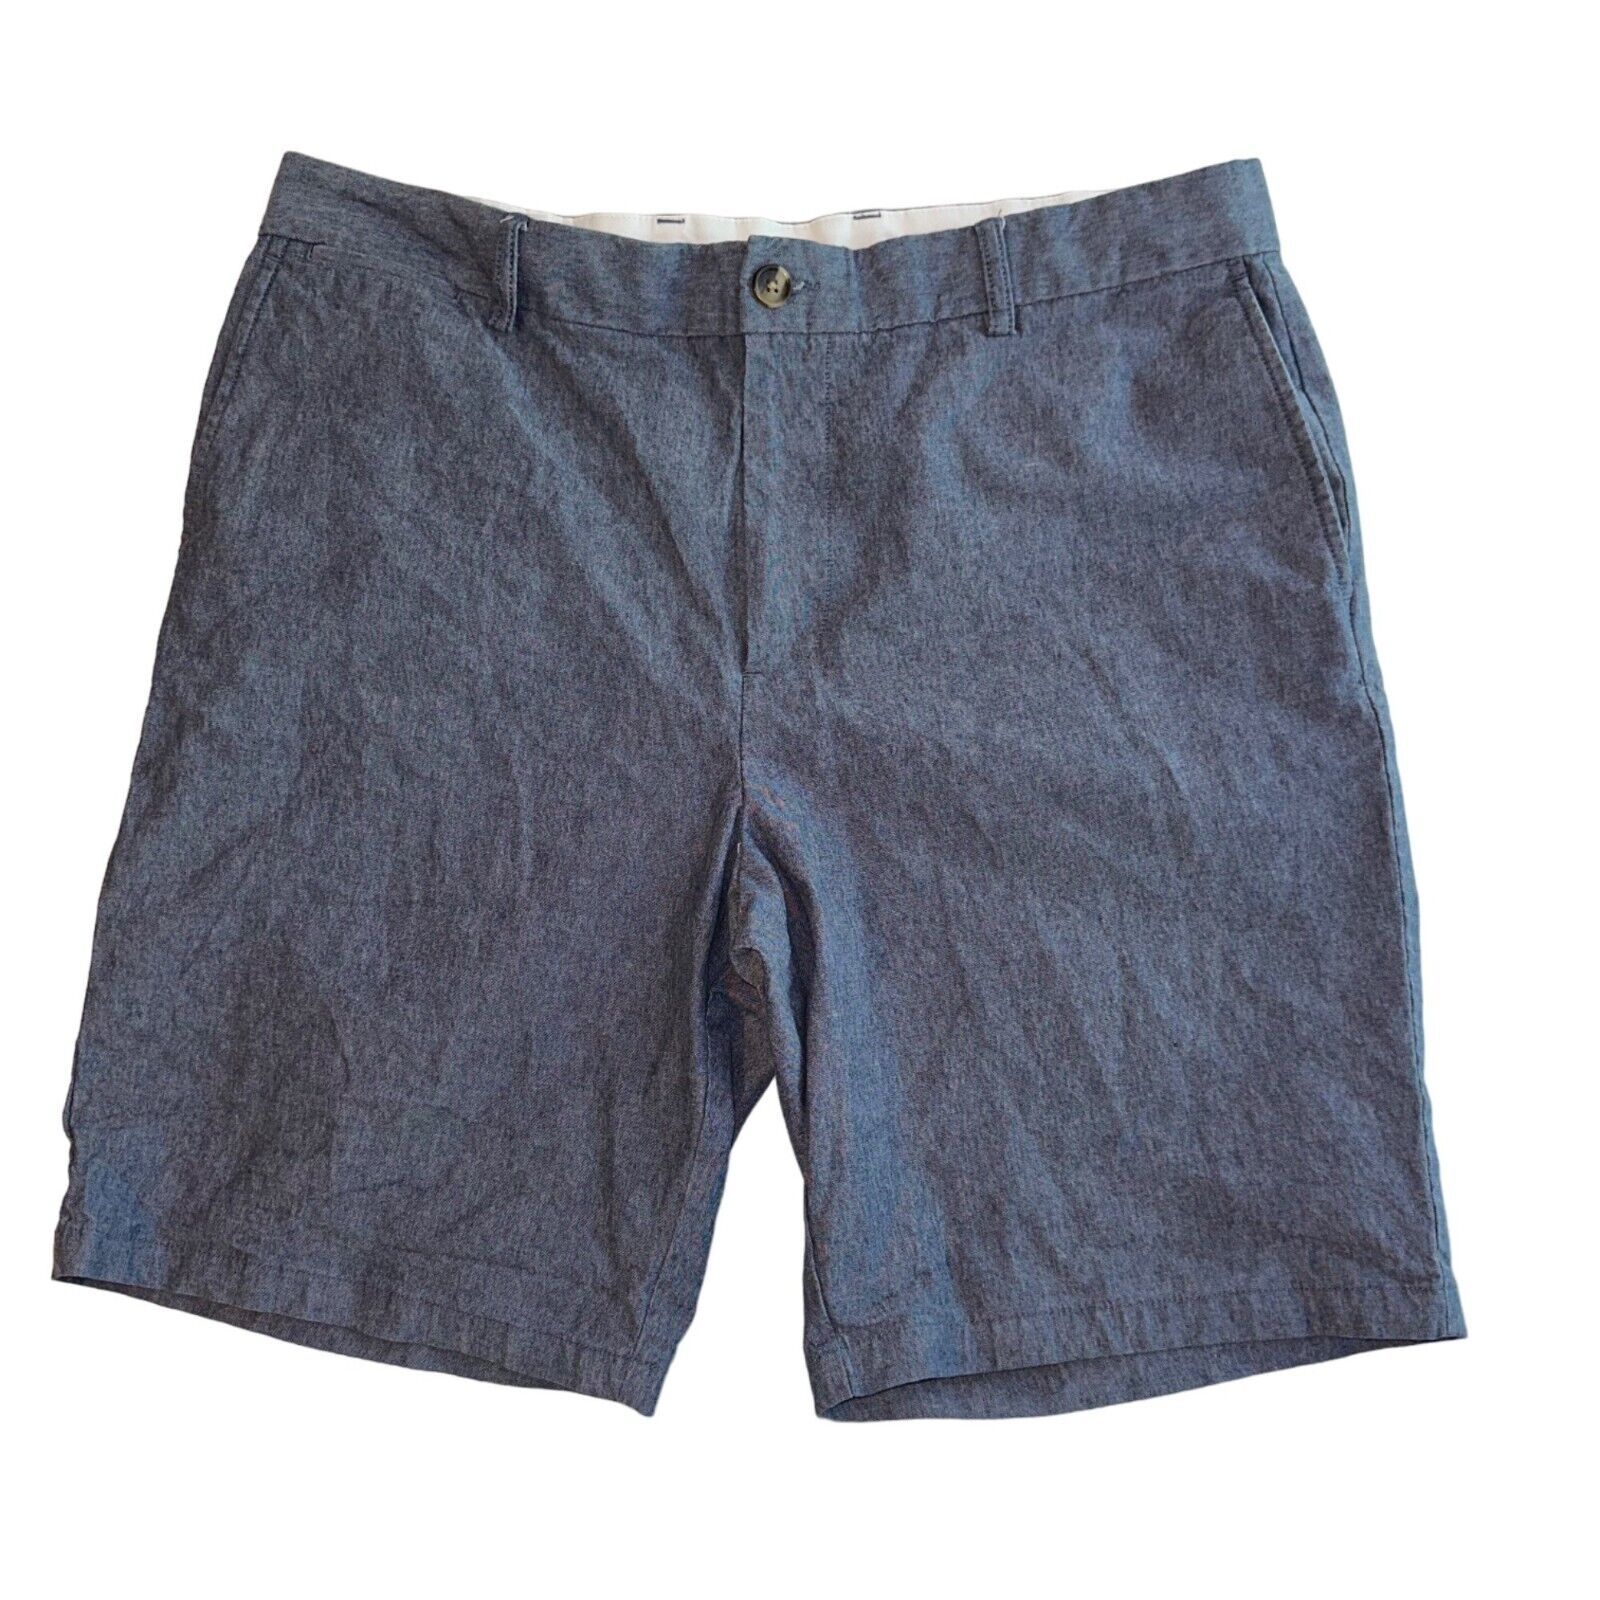 Primary image for Old Navy Blue Chambray Ultimate Slim Built in Flex 10-inch Inseam Shorts Mens 38